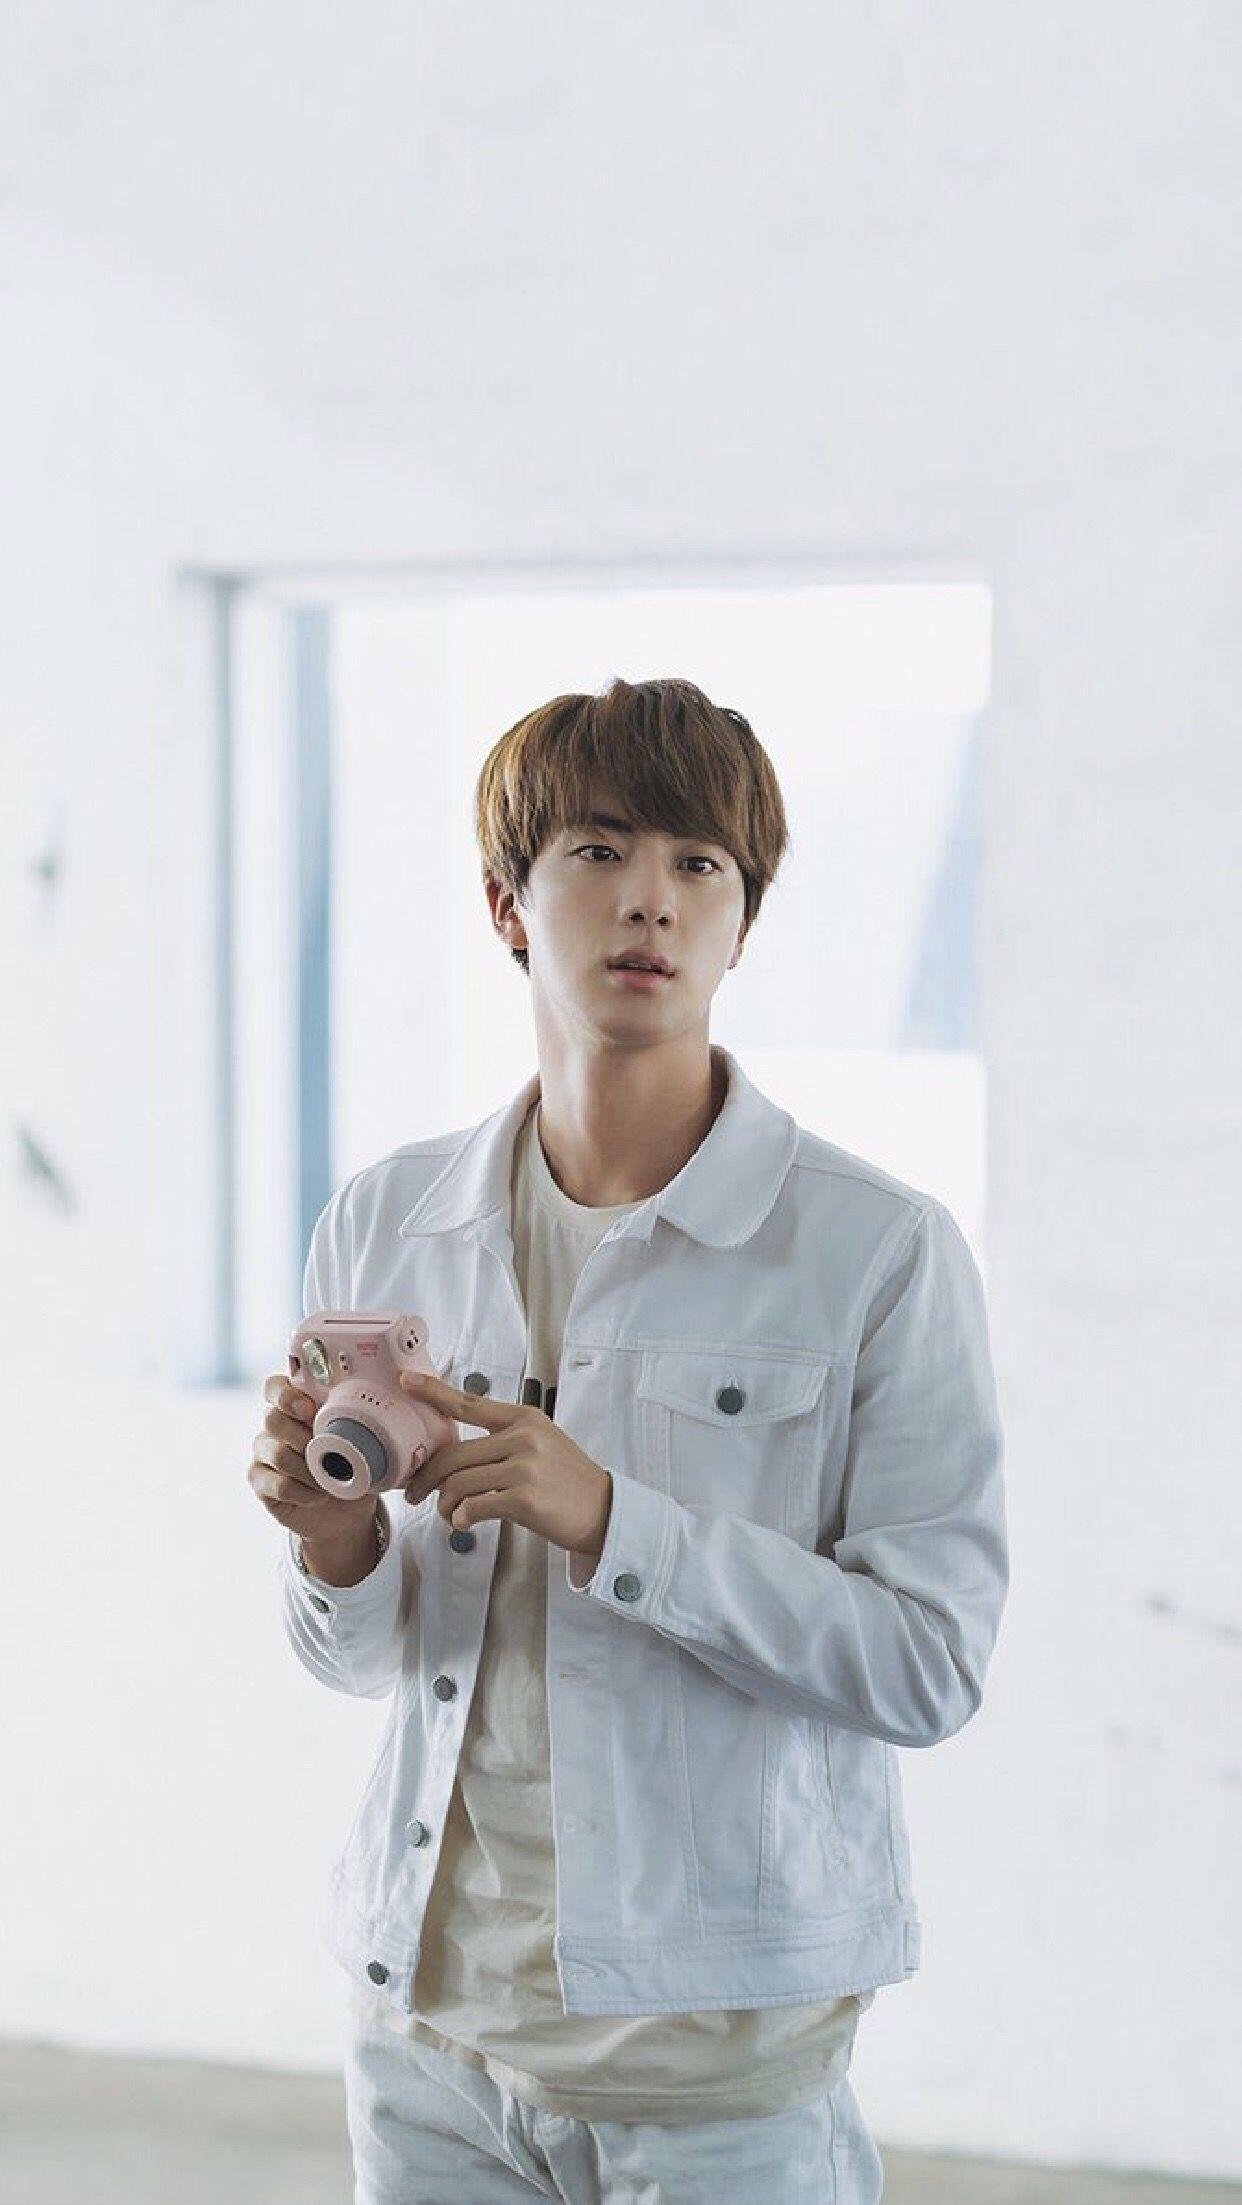 Bts Kim Seokjin Pictures and wallpapers